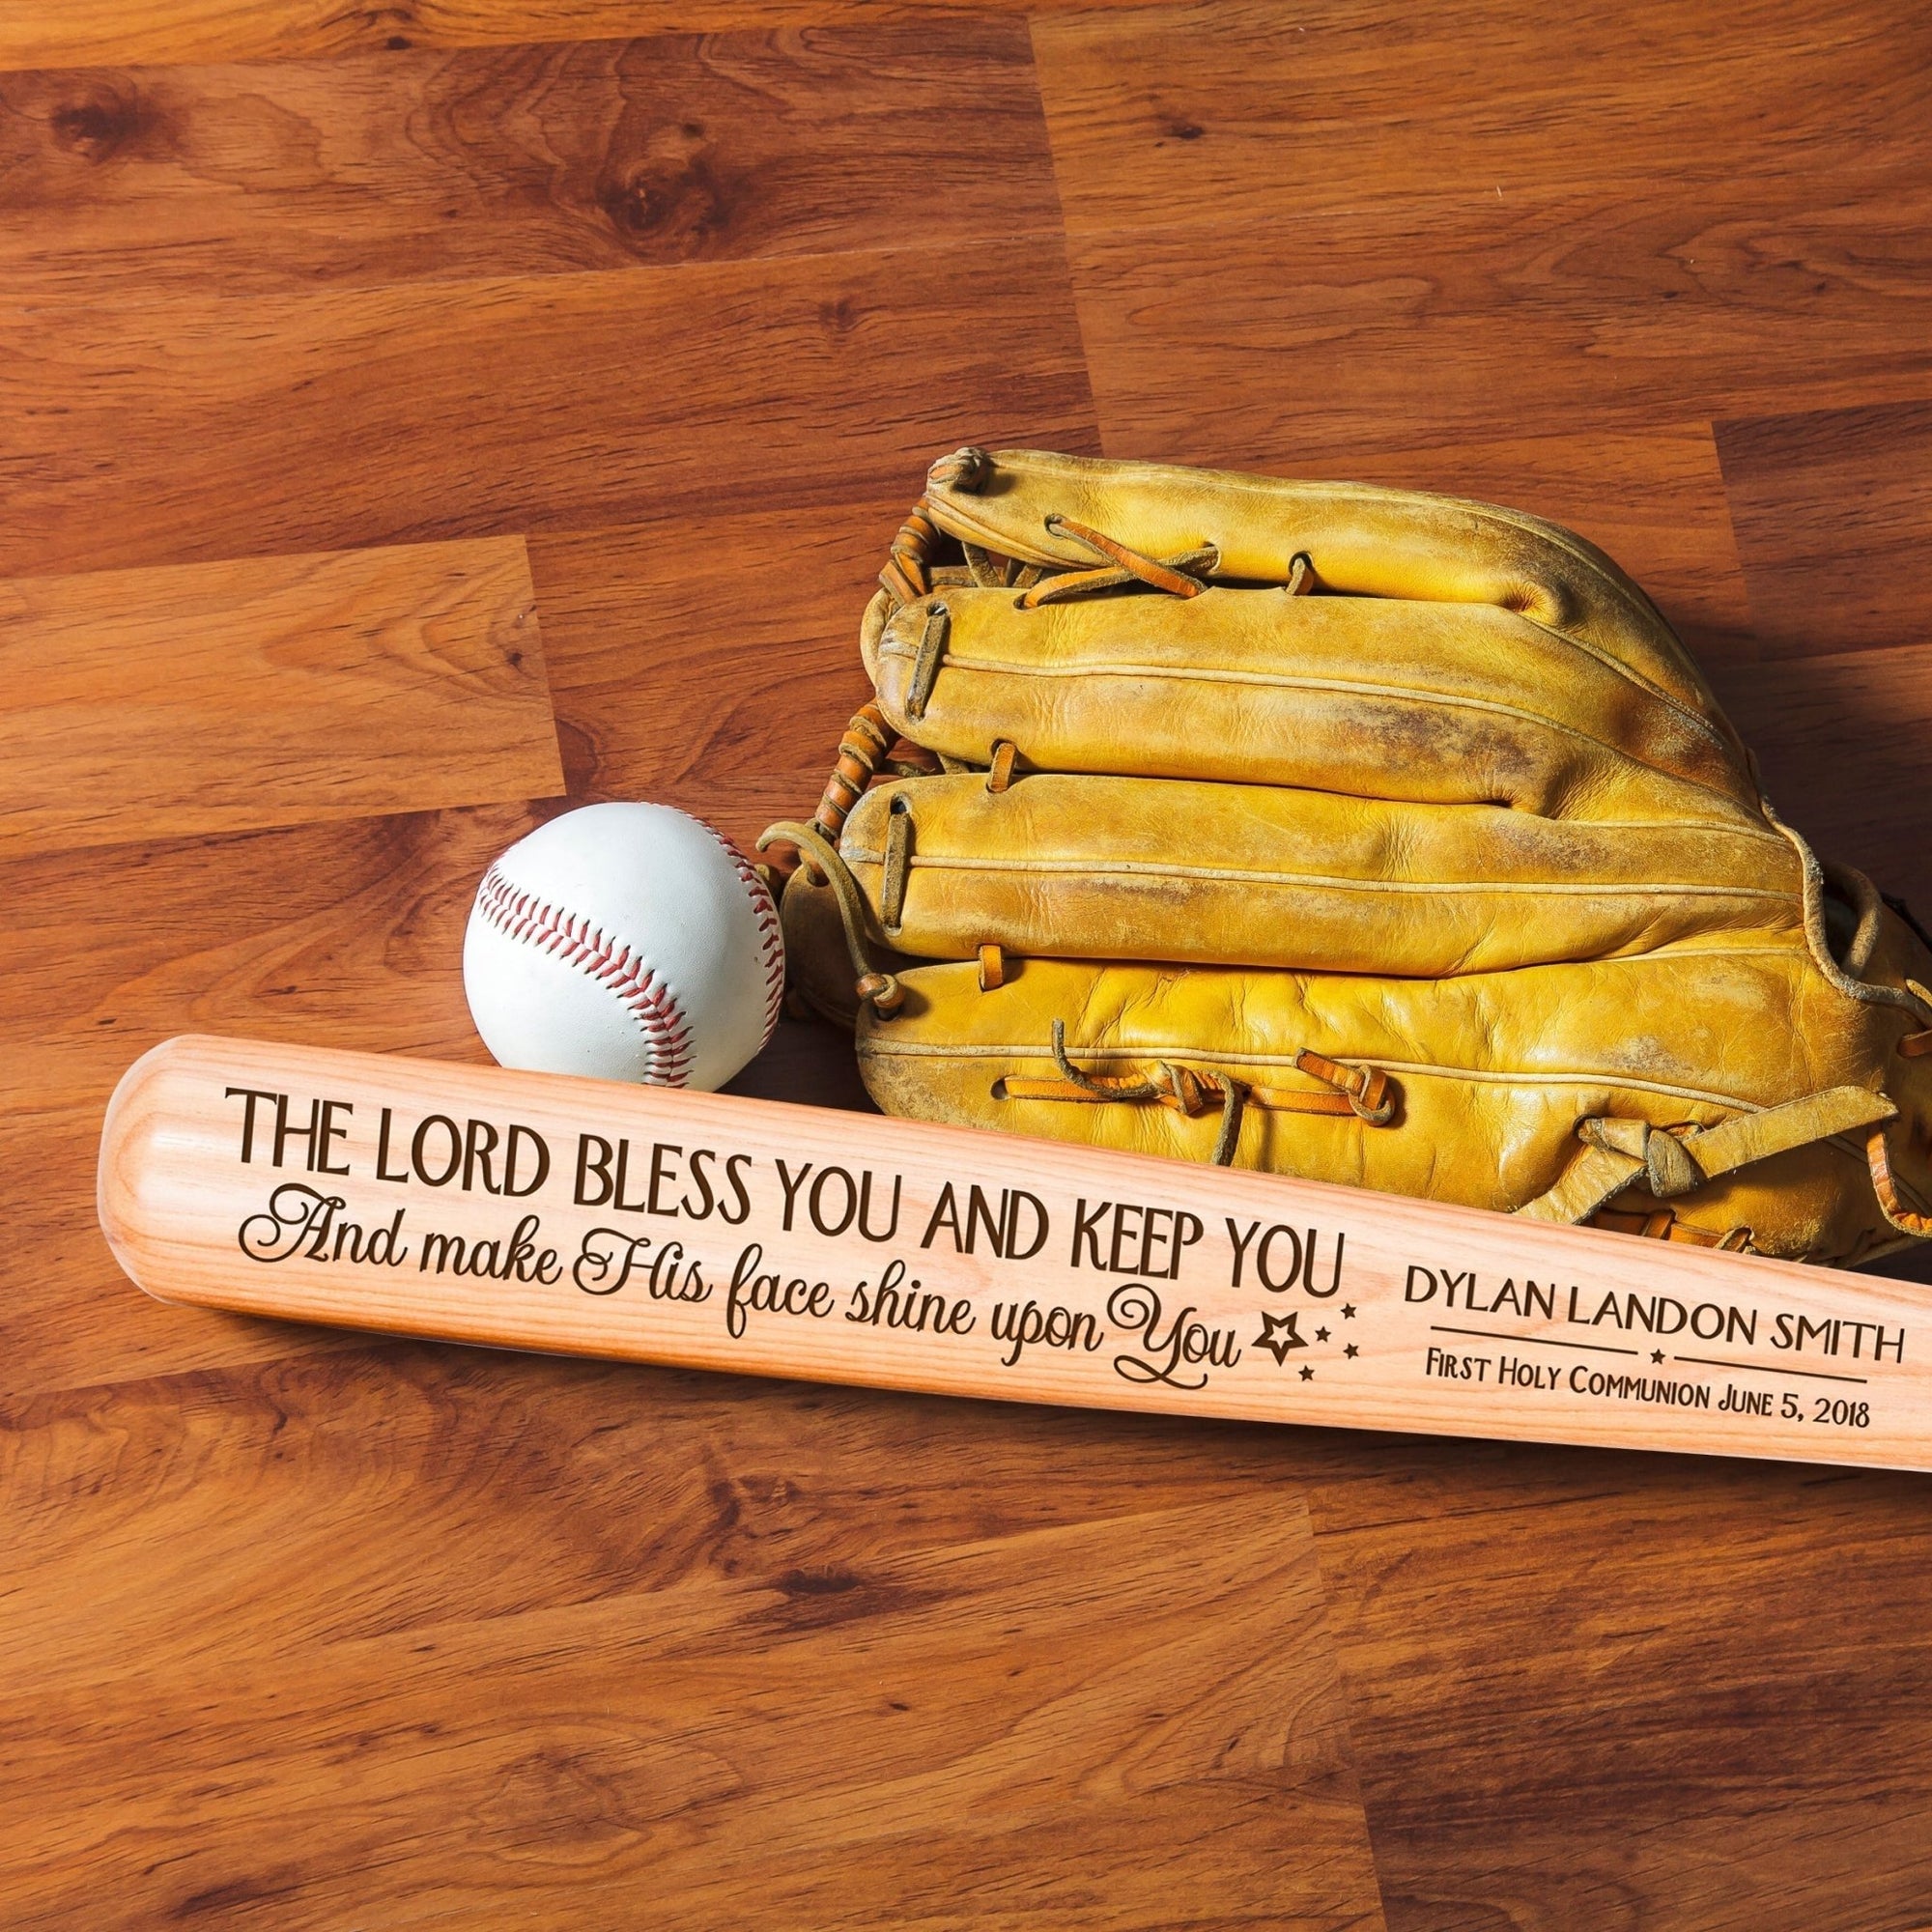 Personalized Baseball Bat Baptism Gifts For Boys - The Lord Bless You - LifeSong Milestones